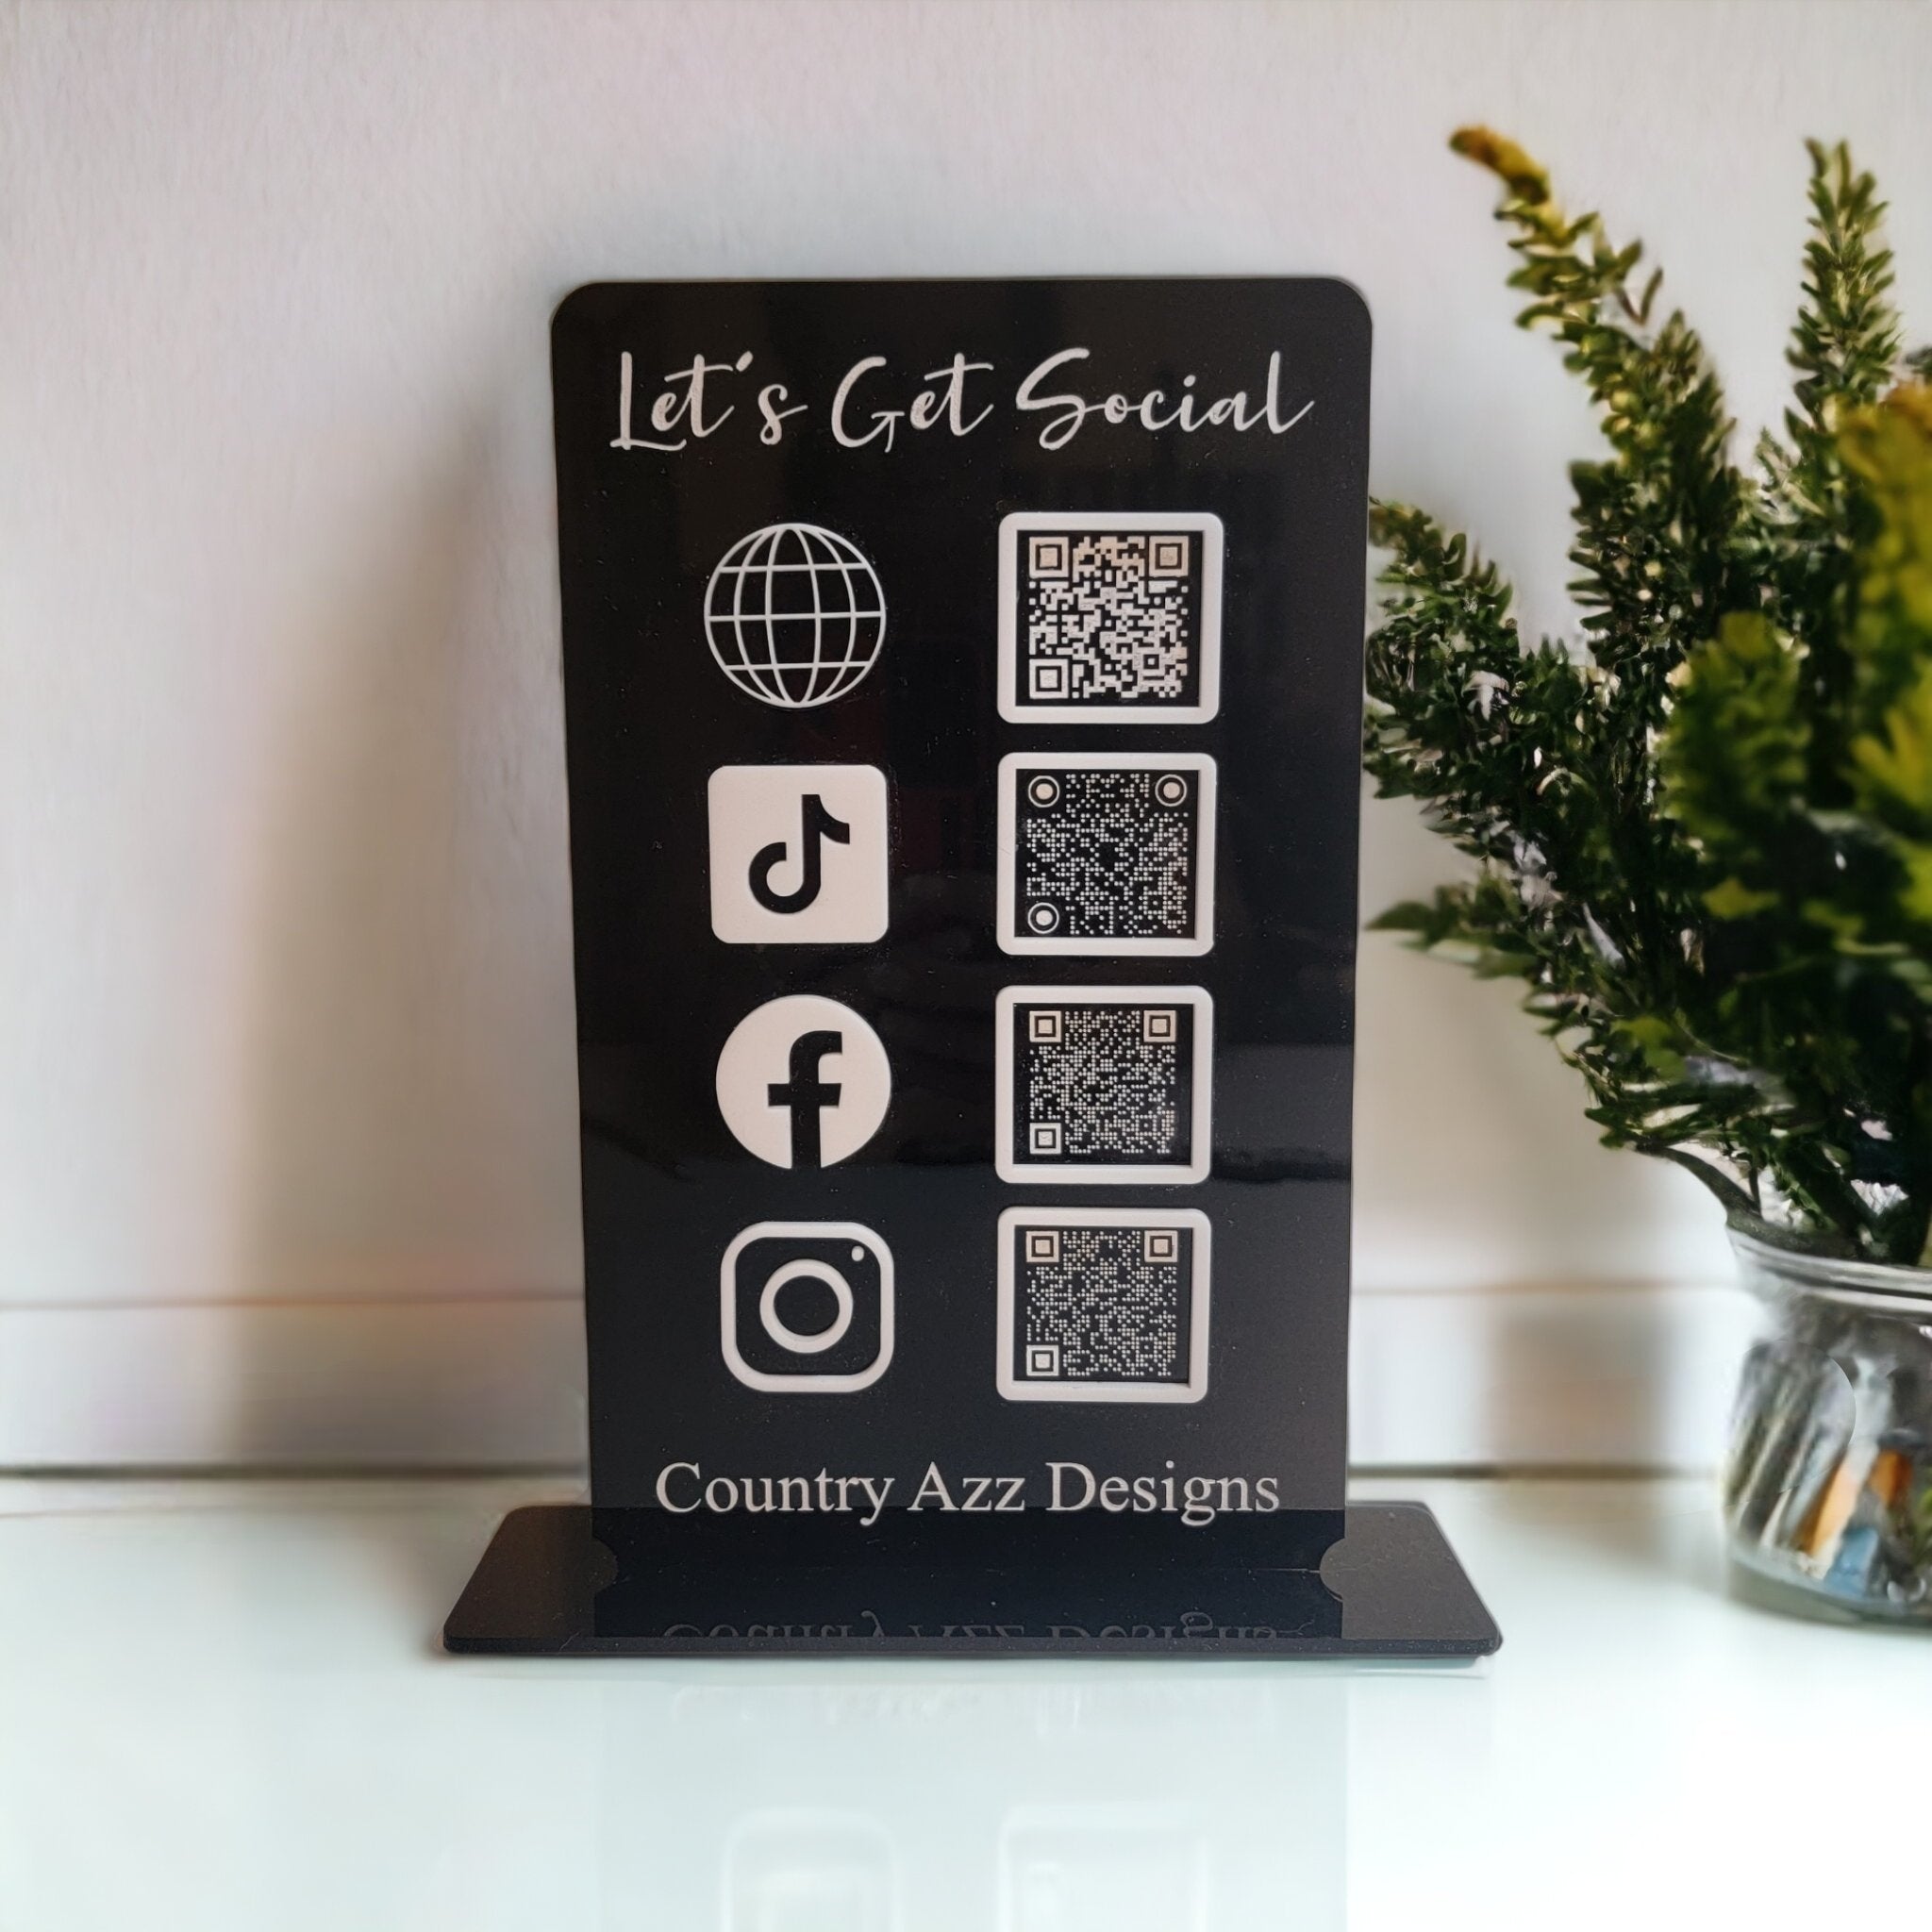 Acrylic Let's Get Social Personalized Social Media Sign With Business Name - Vertical Rectangle 6x10 - Designodeal